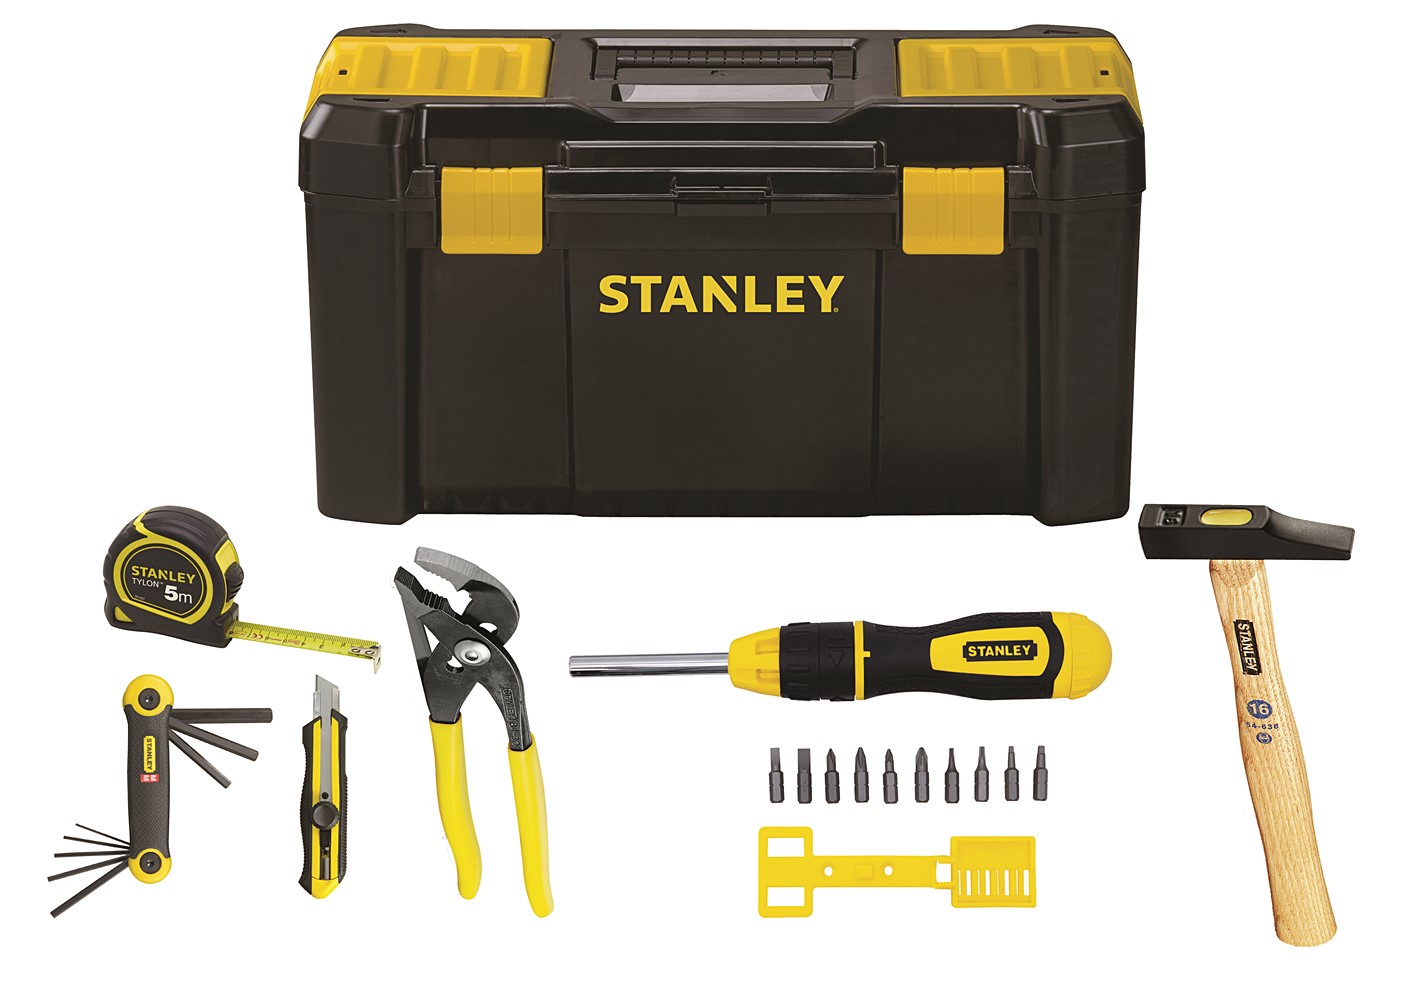 Boite à outils + 6 outils - STANLEY  